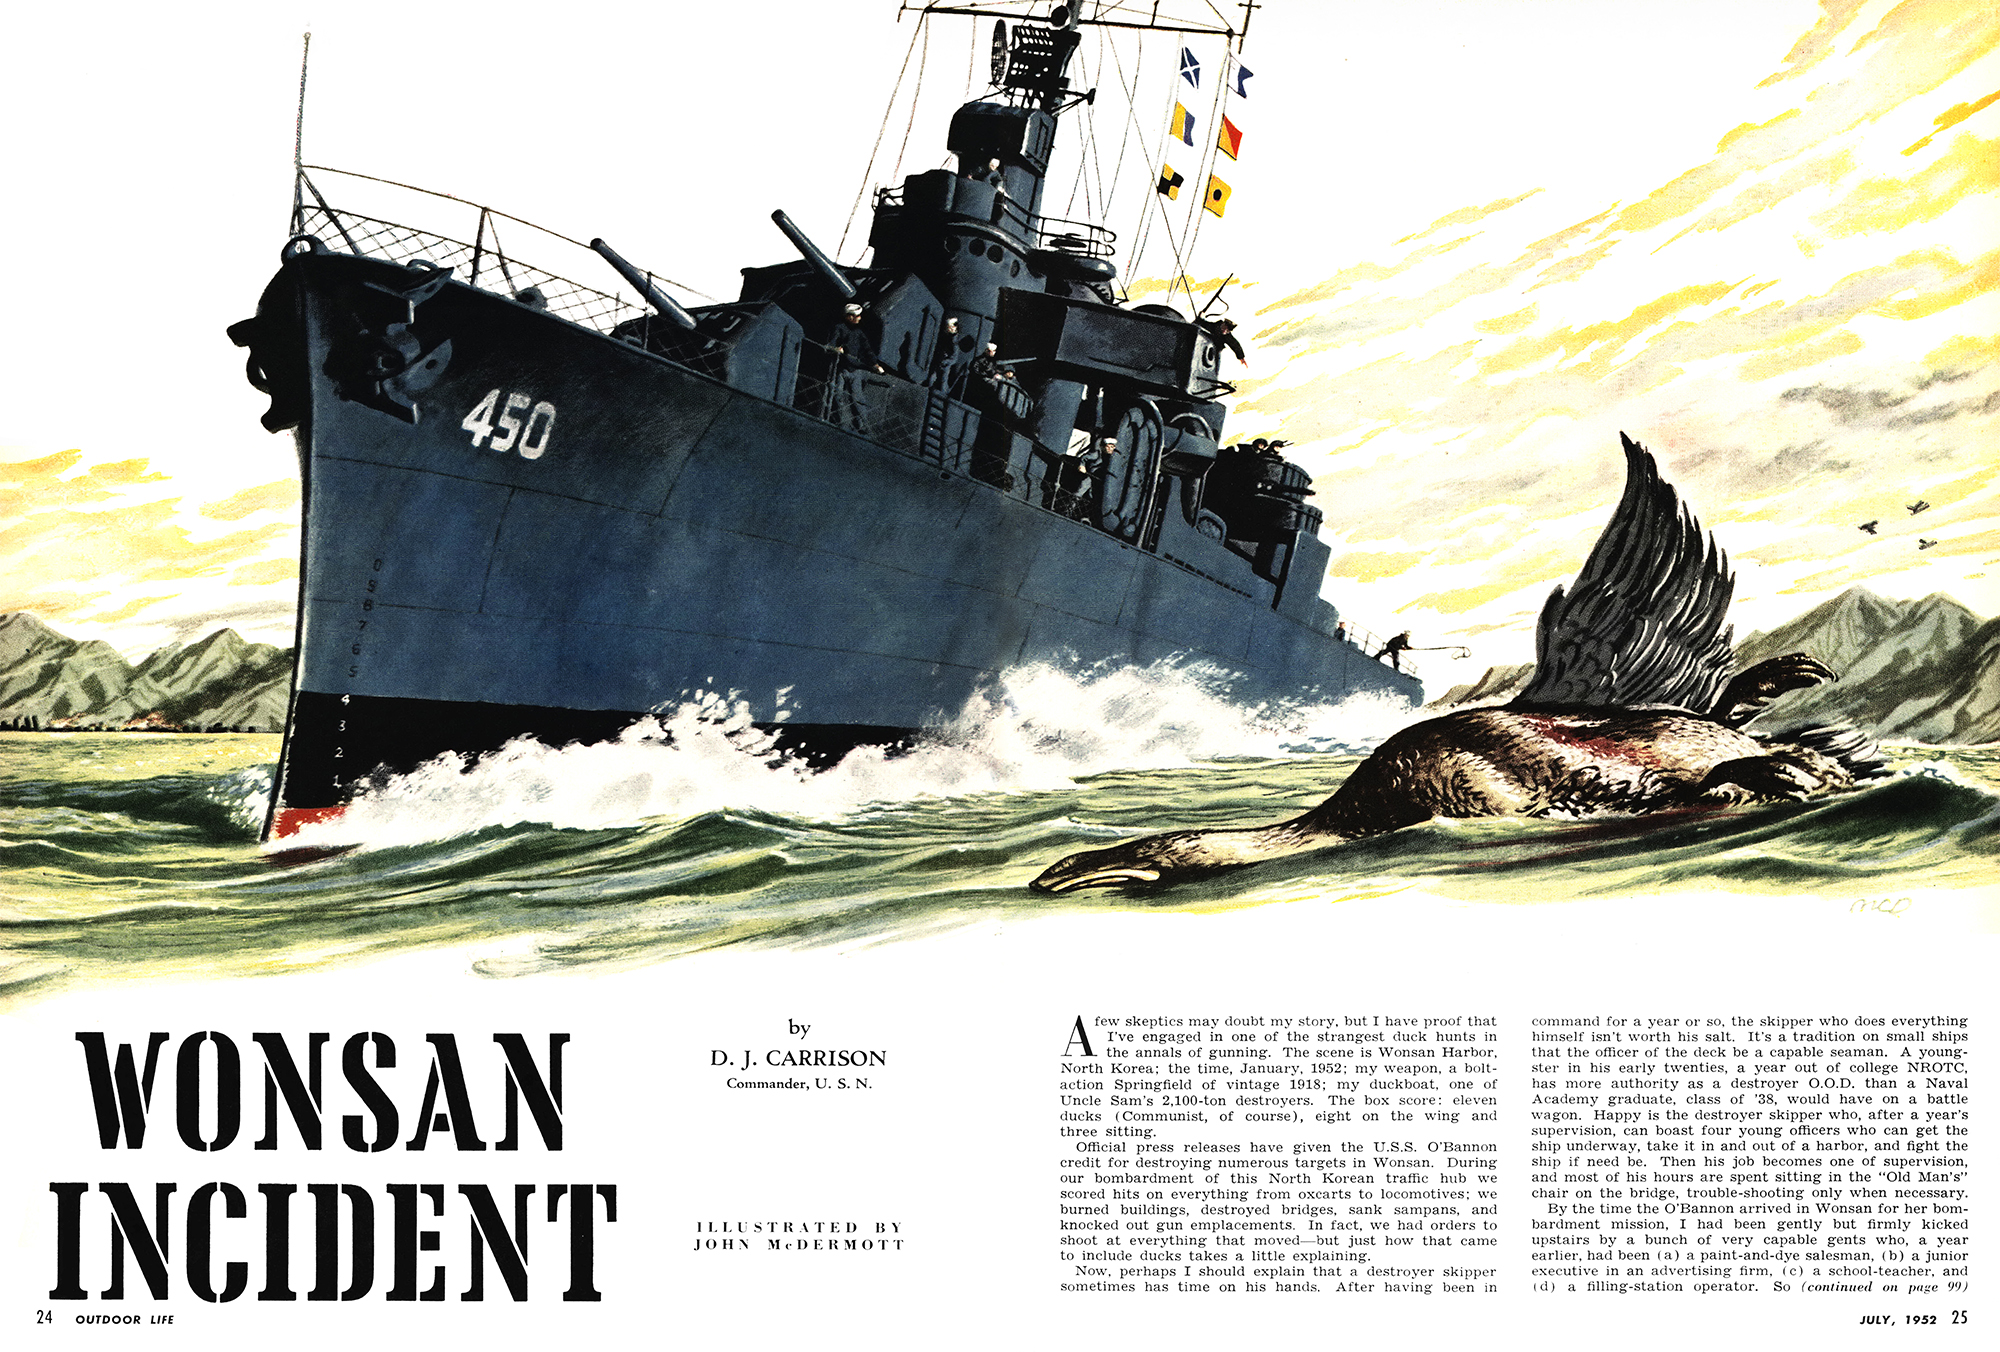 A magazine spread featuring an illustration of a duck and a US naval destroyer.